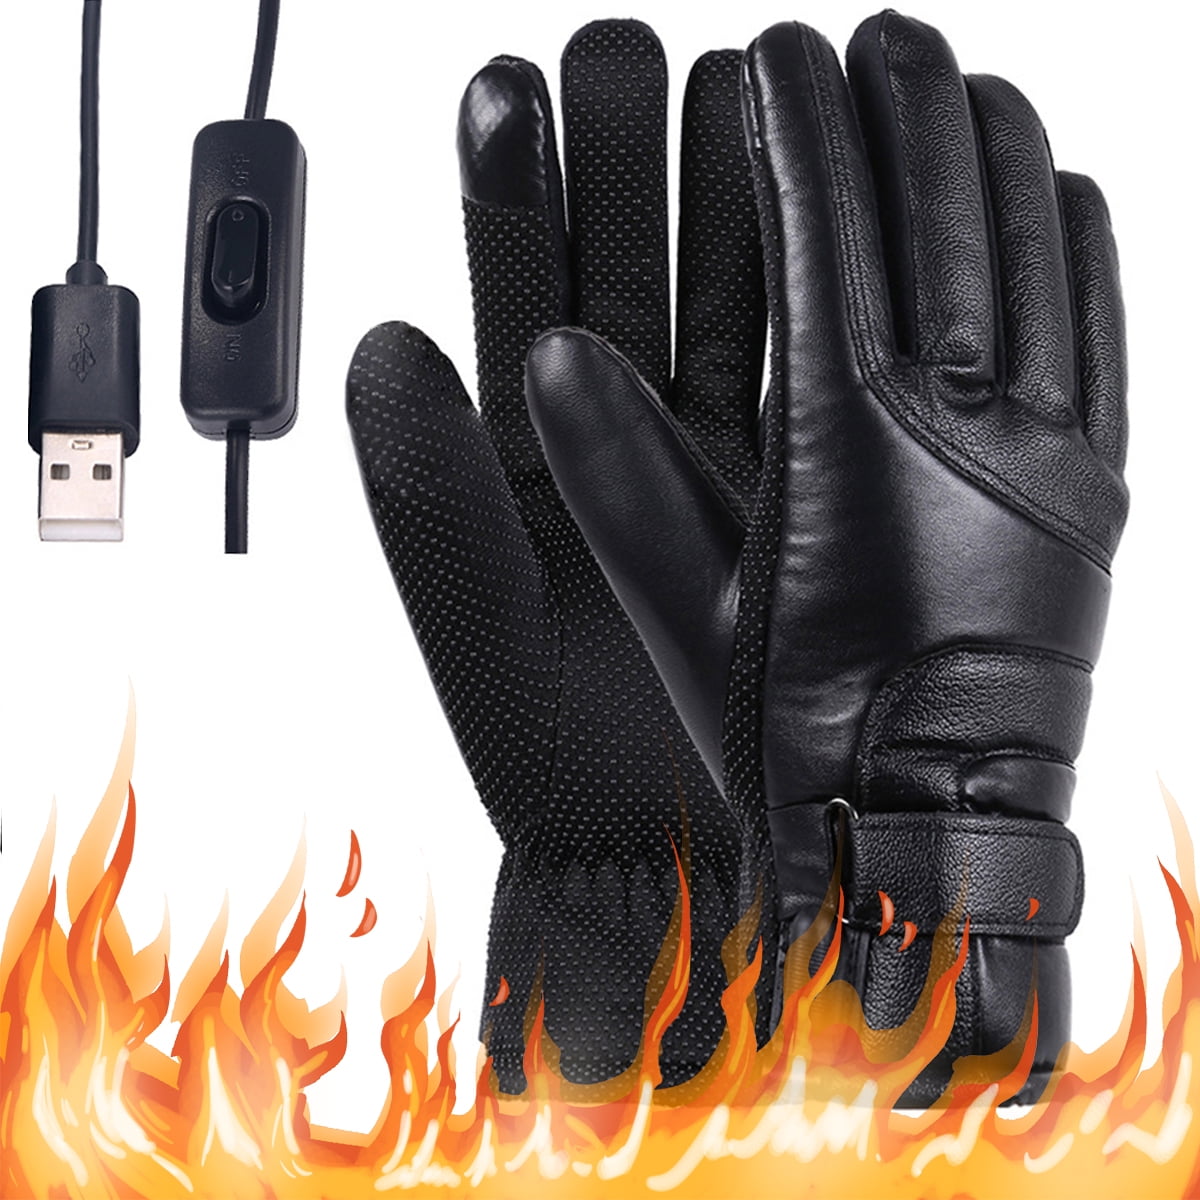  Toddmomy 5 Pairs USB Heated Gloves Heated Thermal